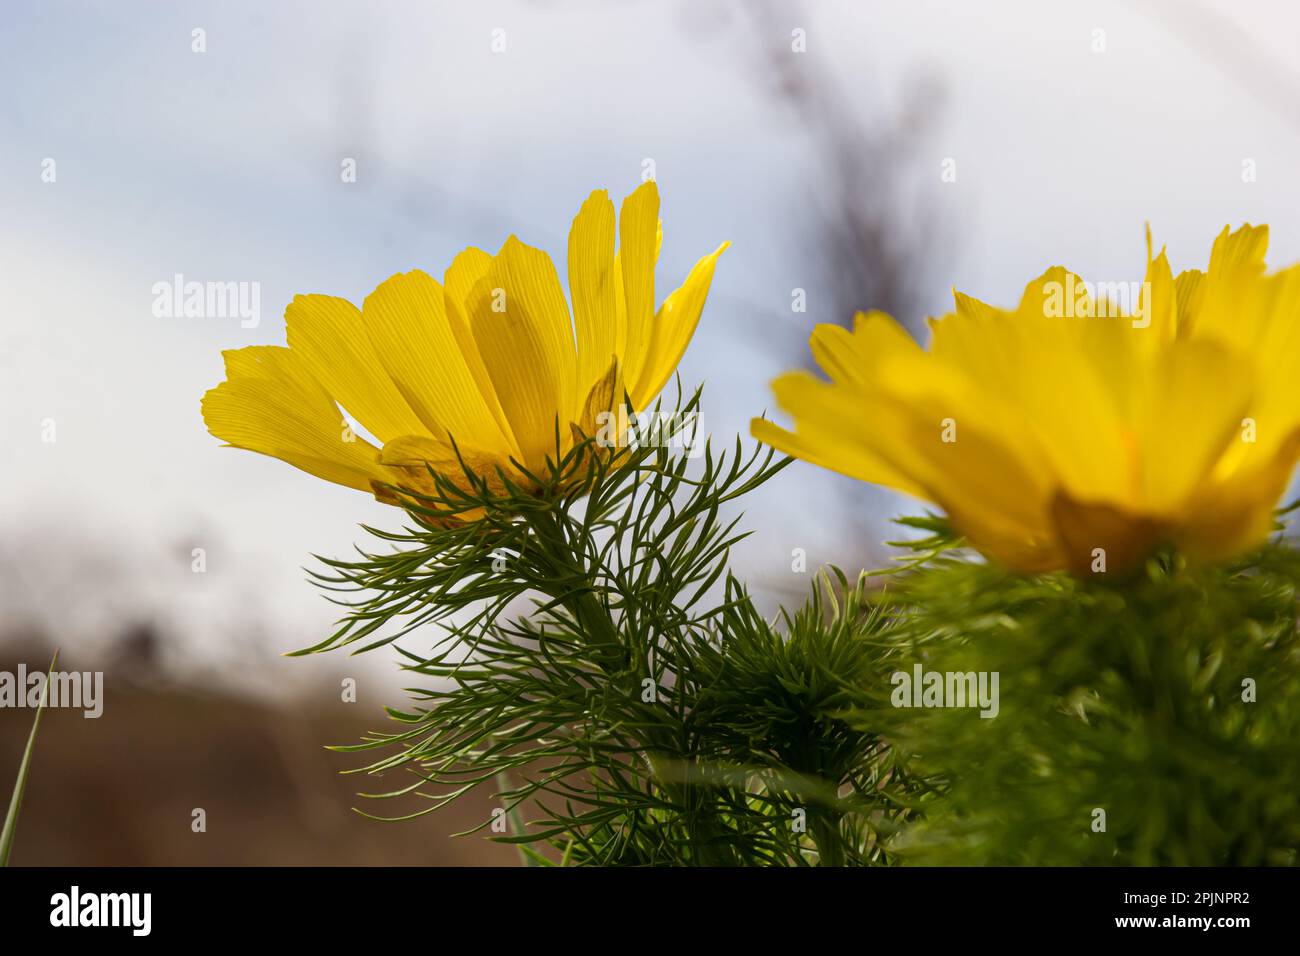 Adonis vernalis is a perennial flowering plant in sping garden. Adonis vernalis is a medicinal plant. Yellow Adonis flowers in natural background. Stock Photo